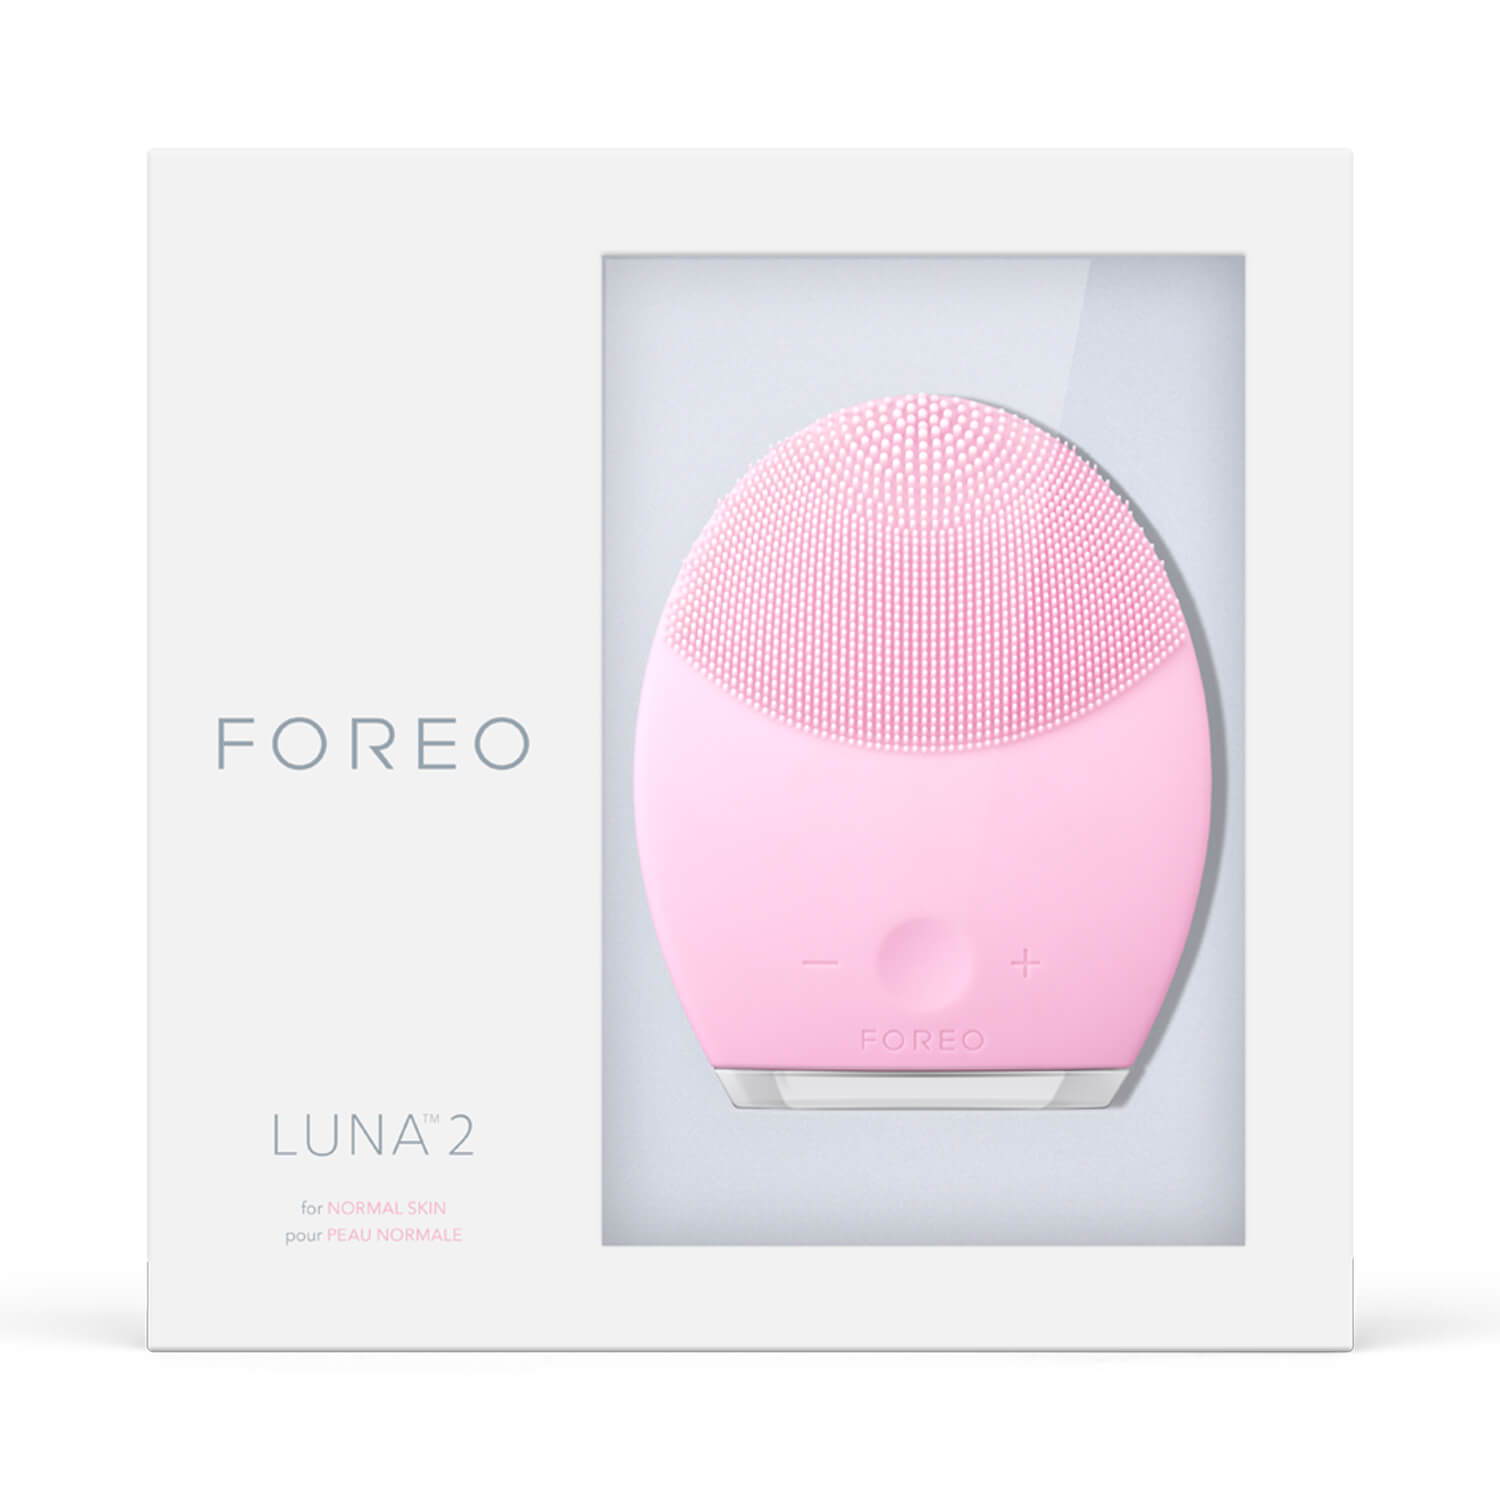 FOREO LUNA 2 Facial Cleansing Brush for Normal Pink Box Shadow